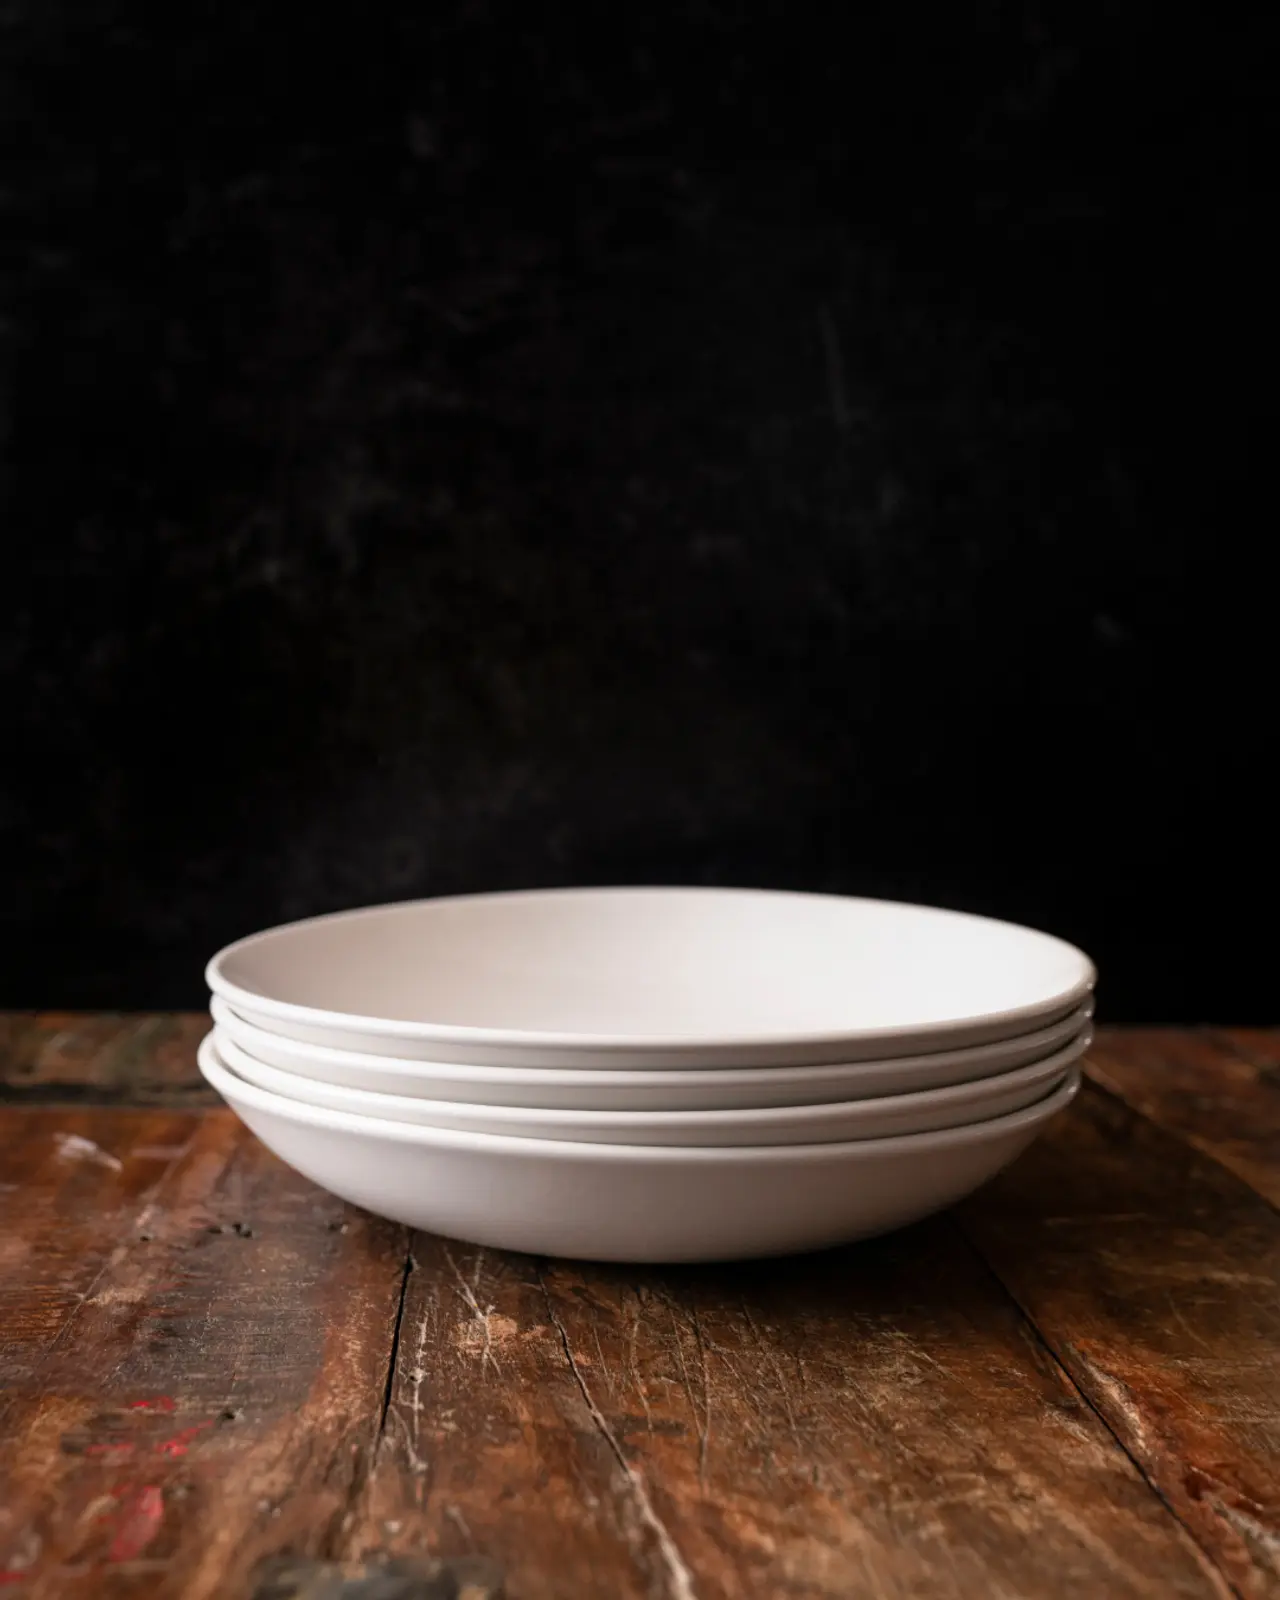 A stack of white plates is positioned on a worn wooden table against a dark background.